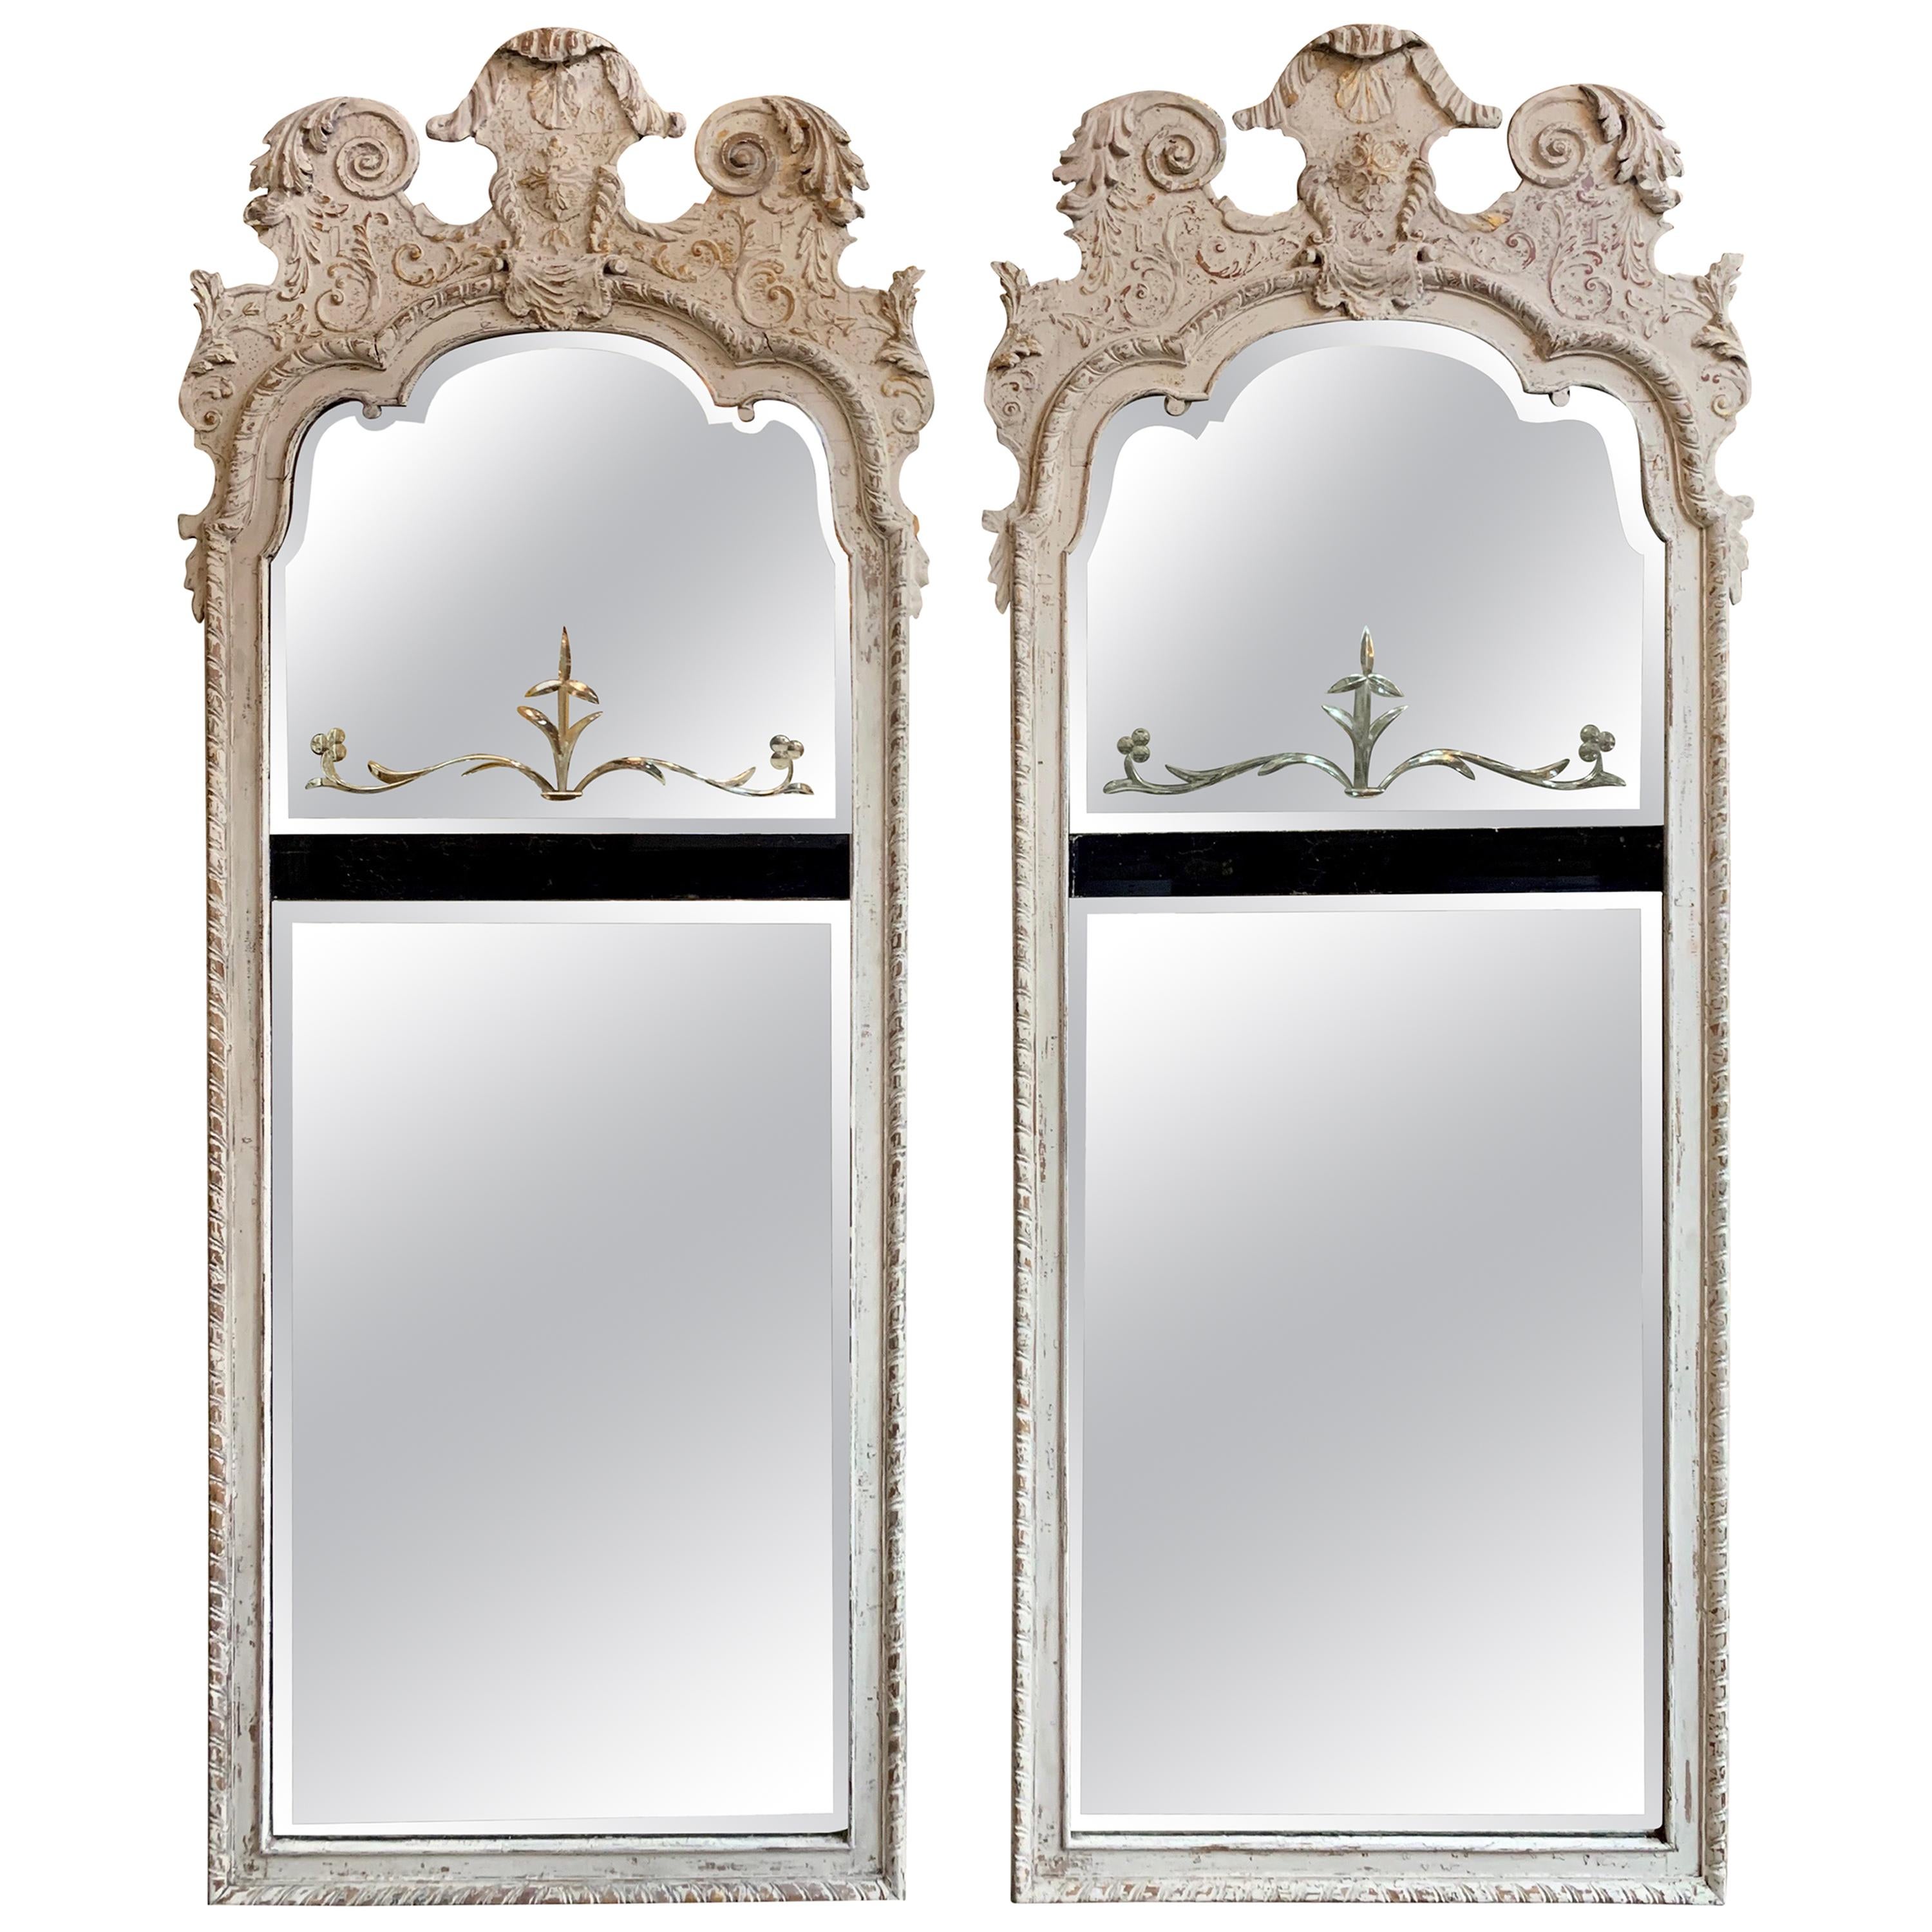 Period English Regency Carved and Painted Mirrors with Divided Glass For Sale